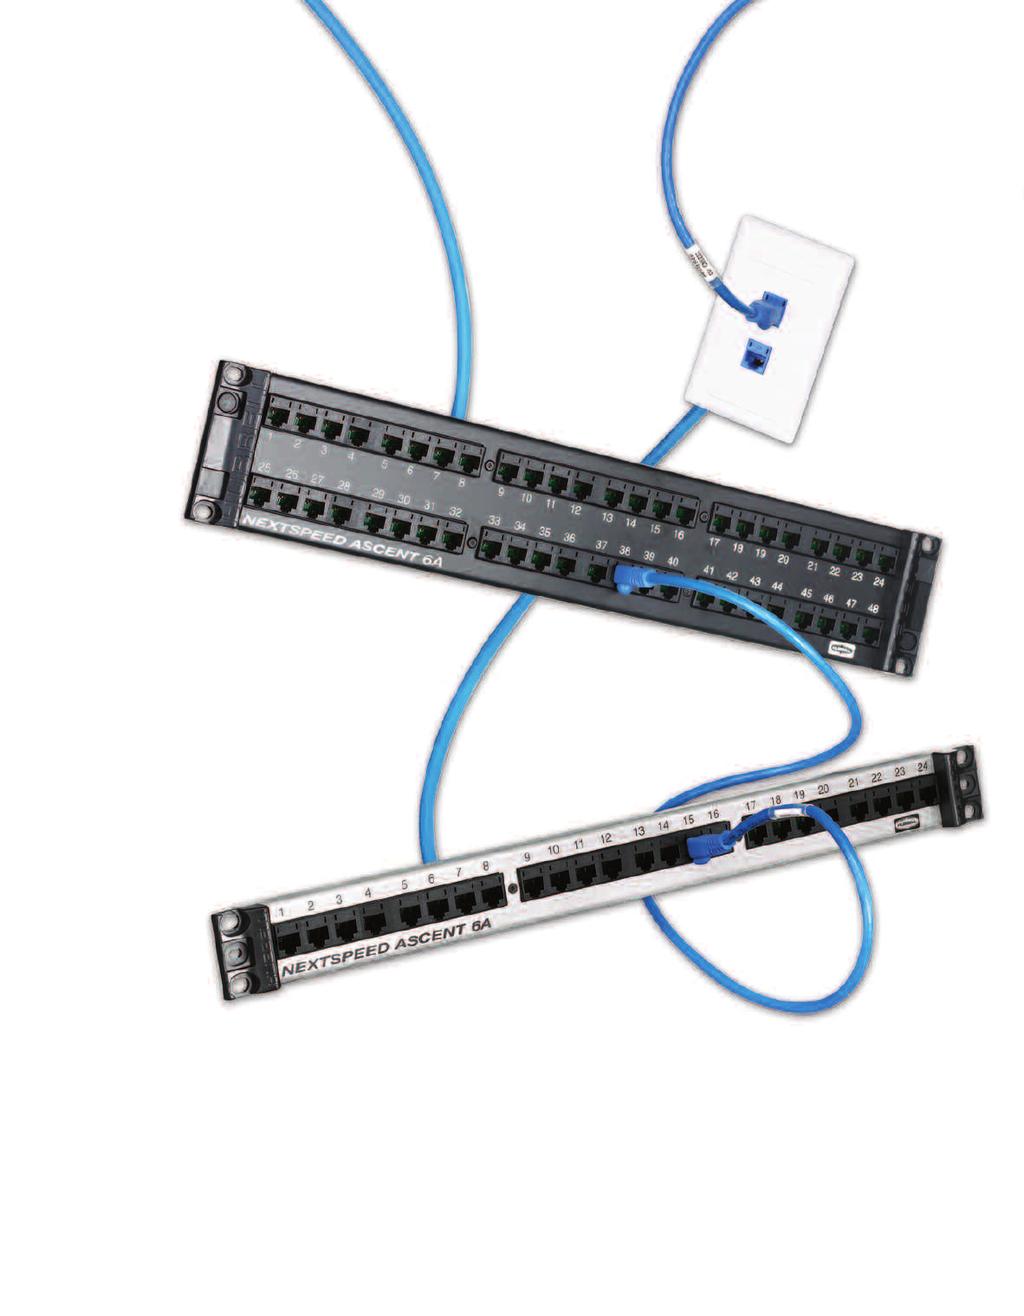 SureBit Category 6A, 6, 5e and Fiber Systems are developed through a technology and marketing alliance between two industry leaders, Hubbell Premise Wiring and Mohawk, to research, design, develop,